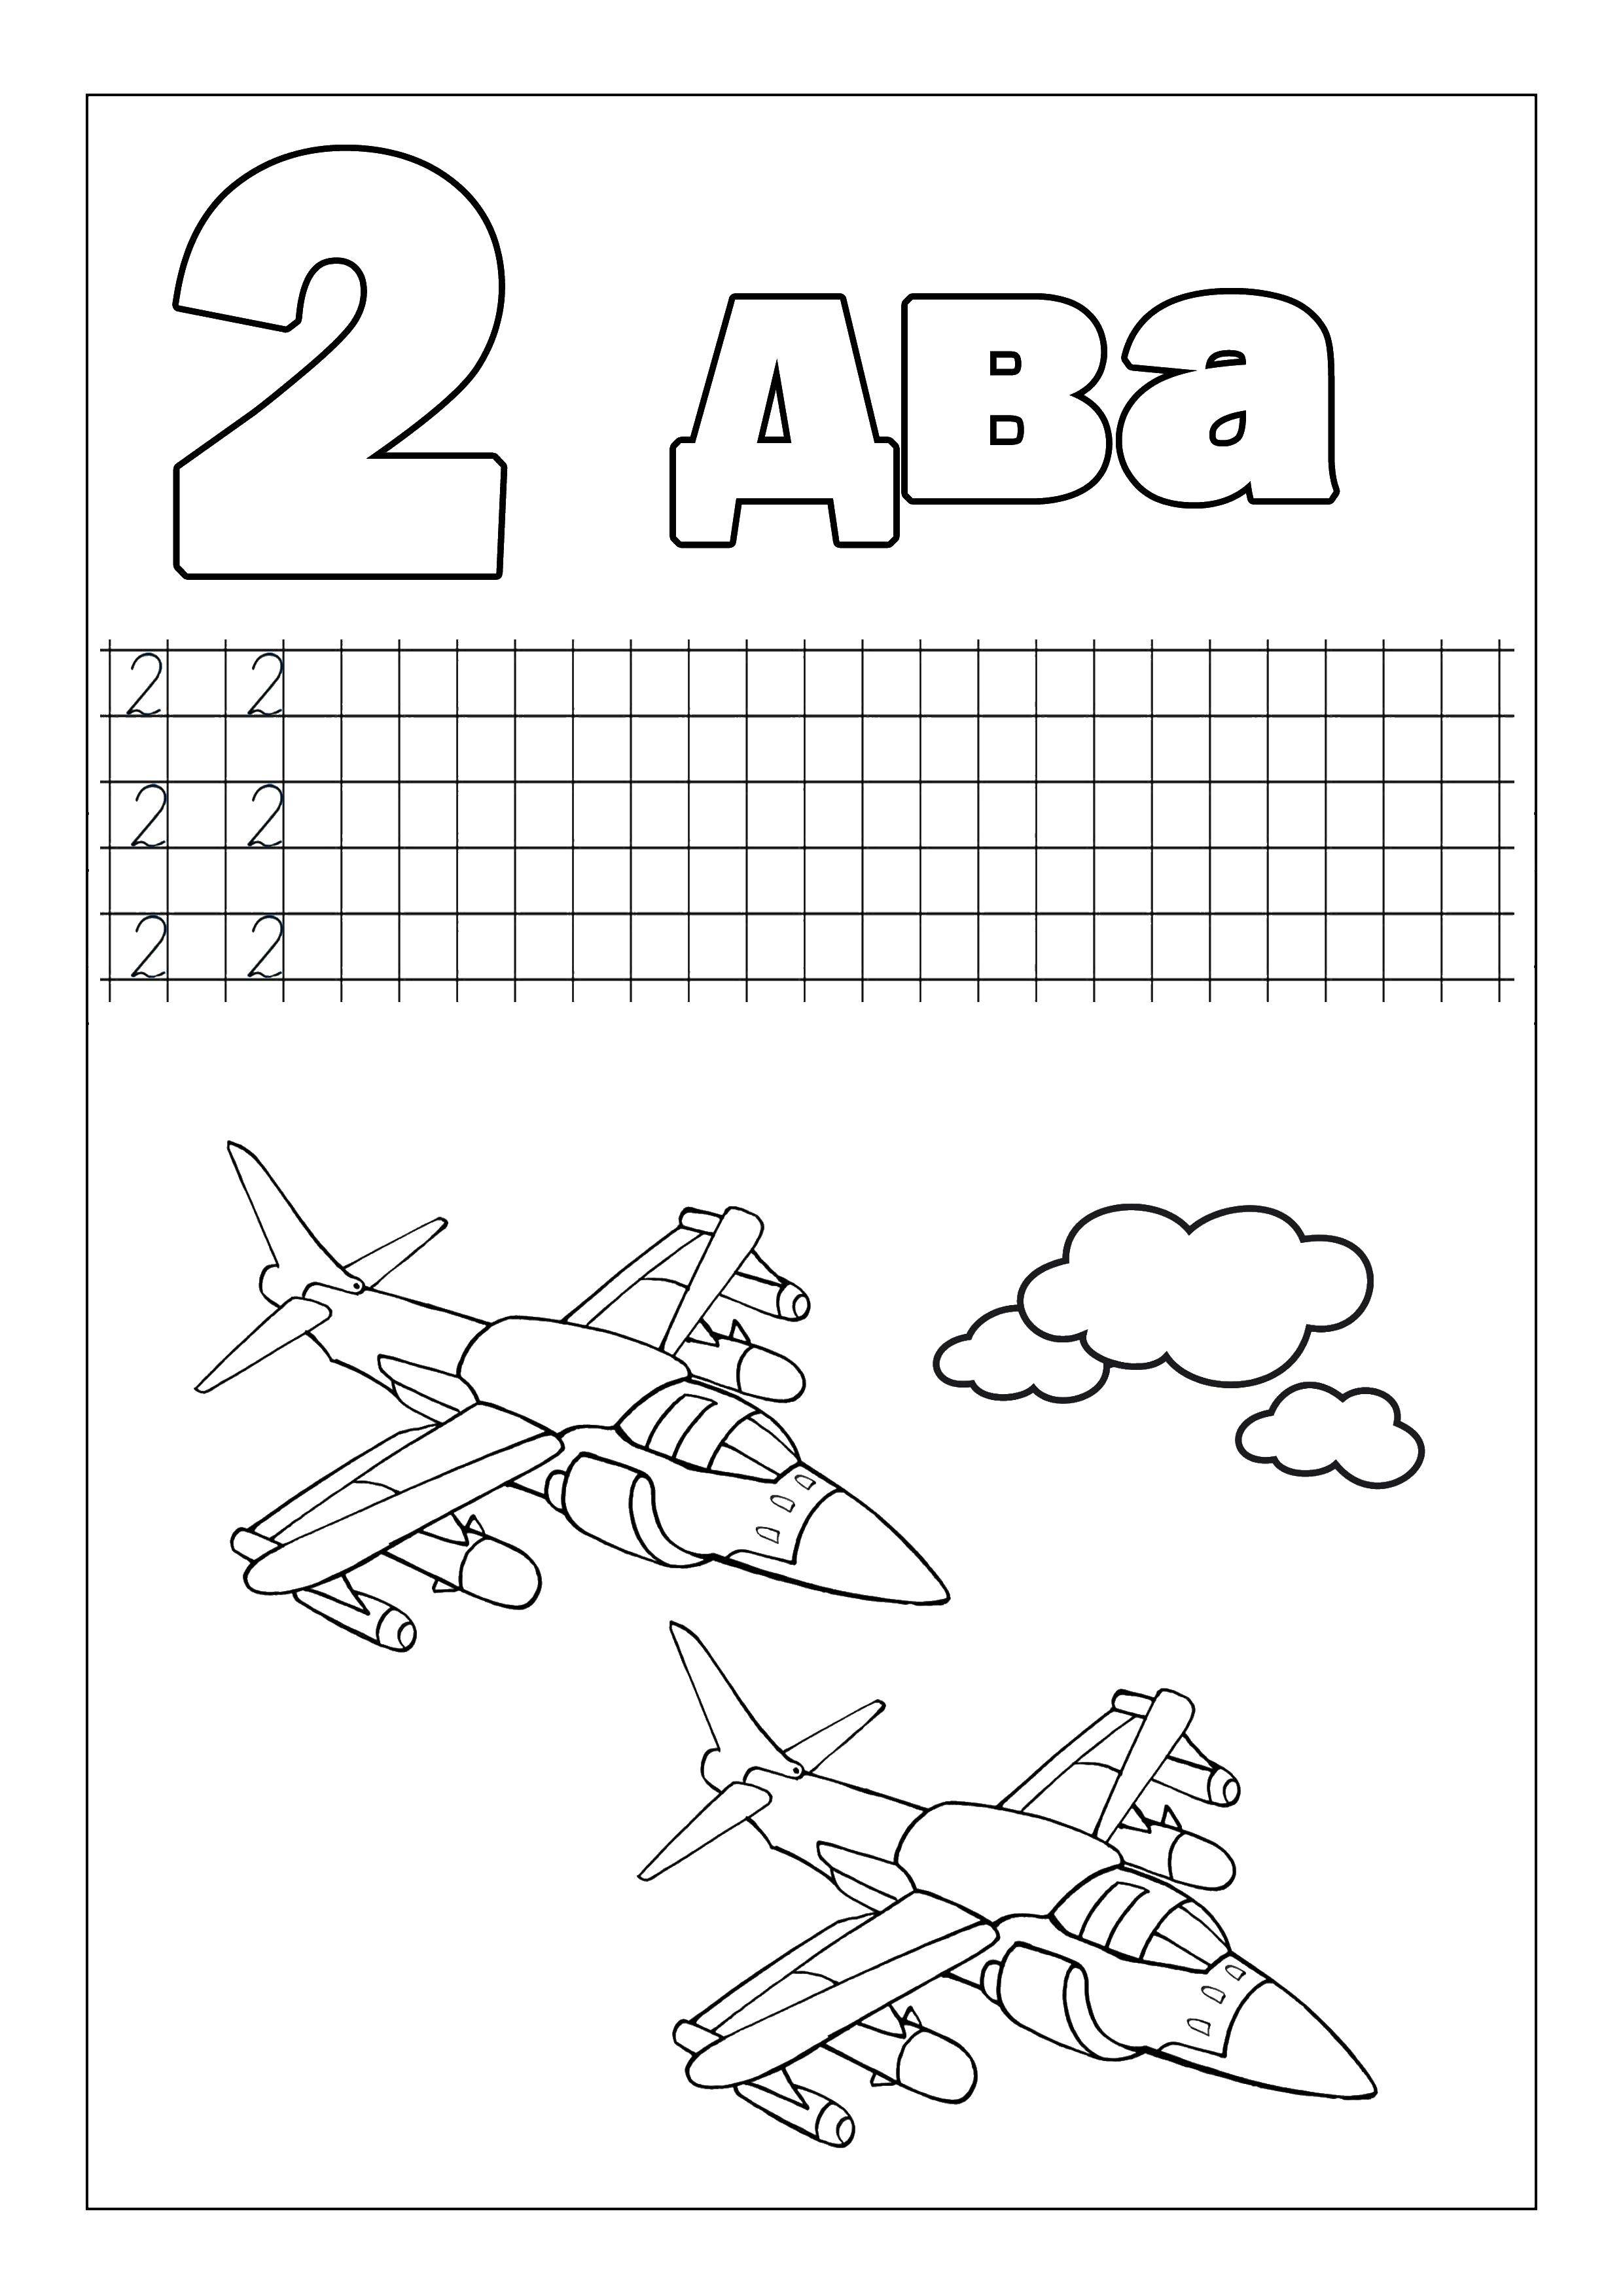 Coloring Recipe 2. Category tracing numbers. Tags:  recipe, 2, plane.